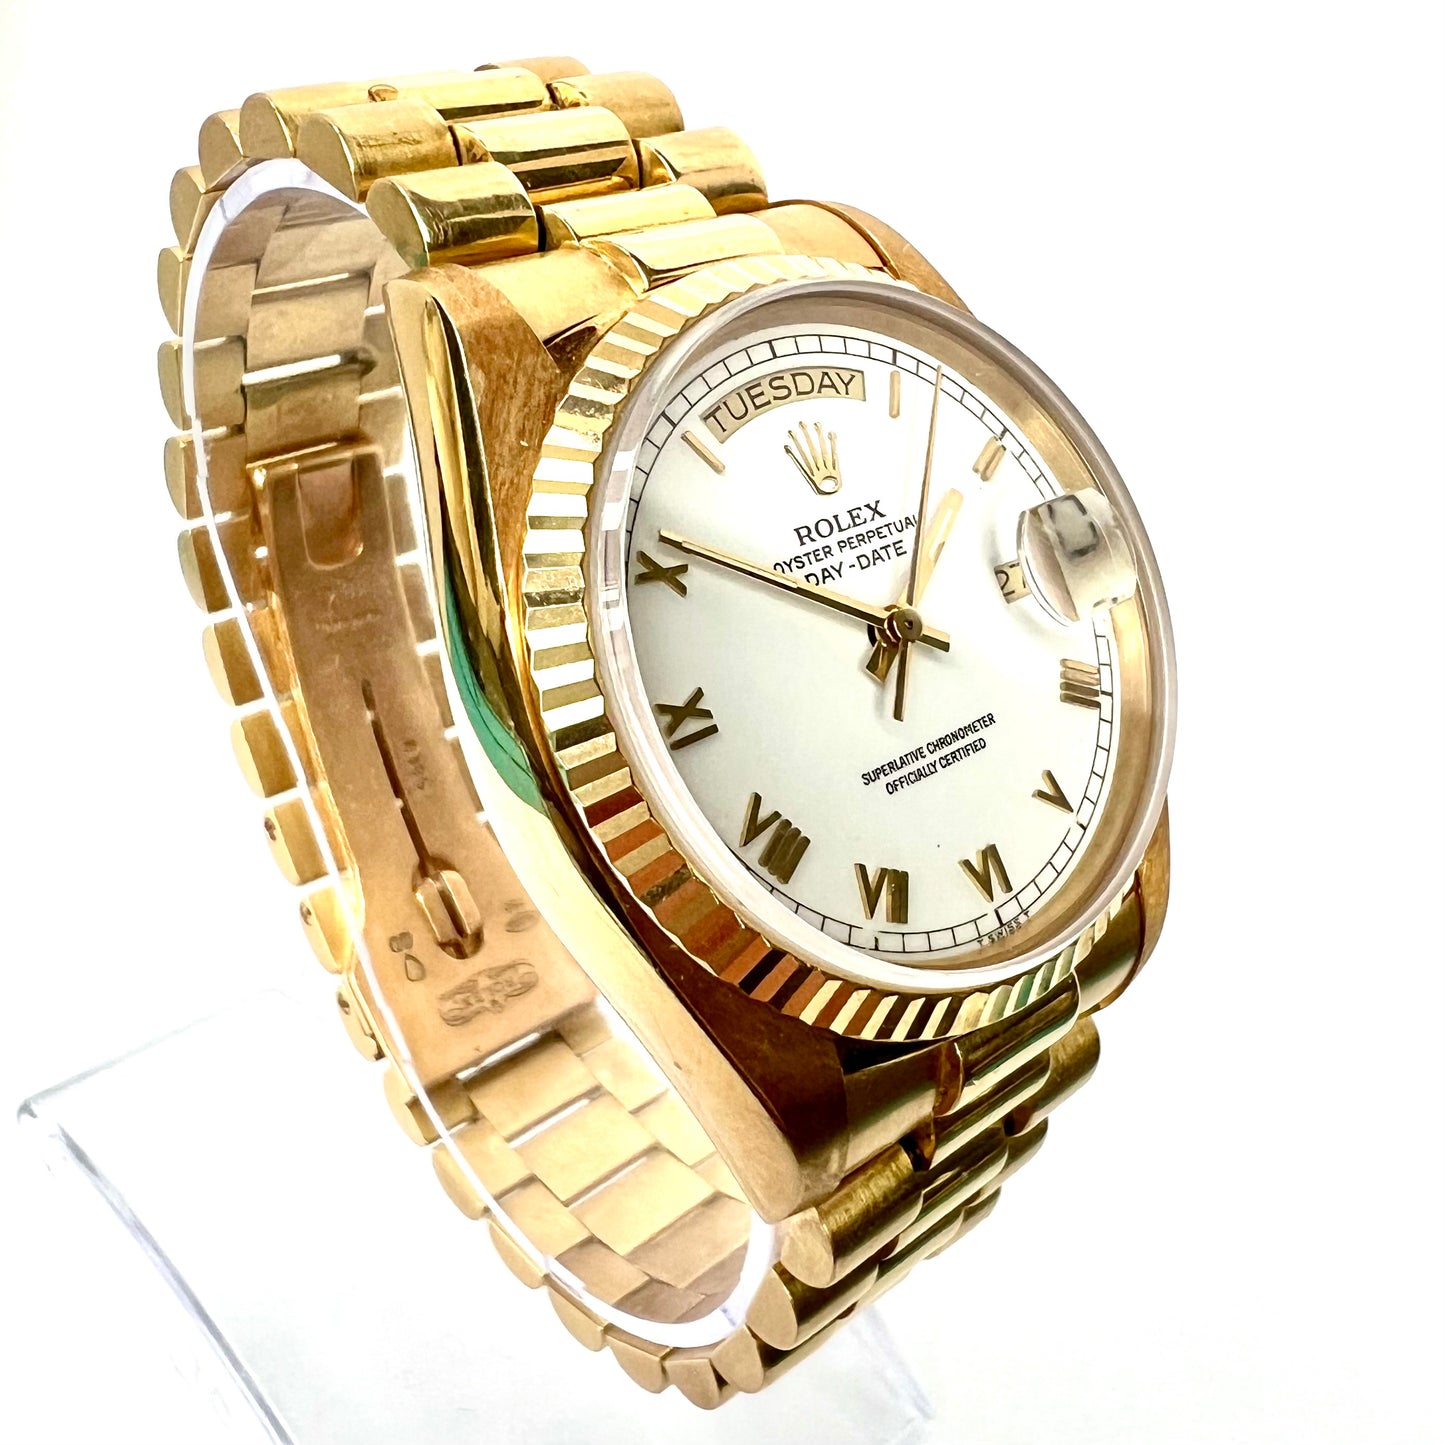 ROLEX OYSTER PERPETUAL DAY-DATE Automatic 36mm 18K YG Watch